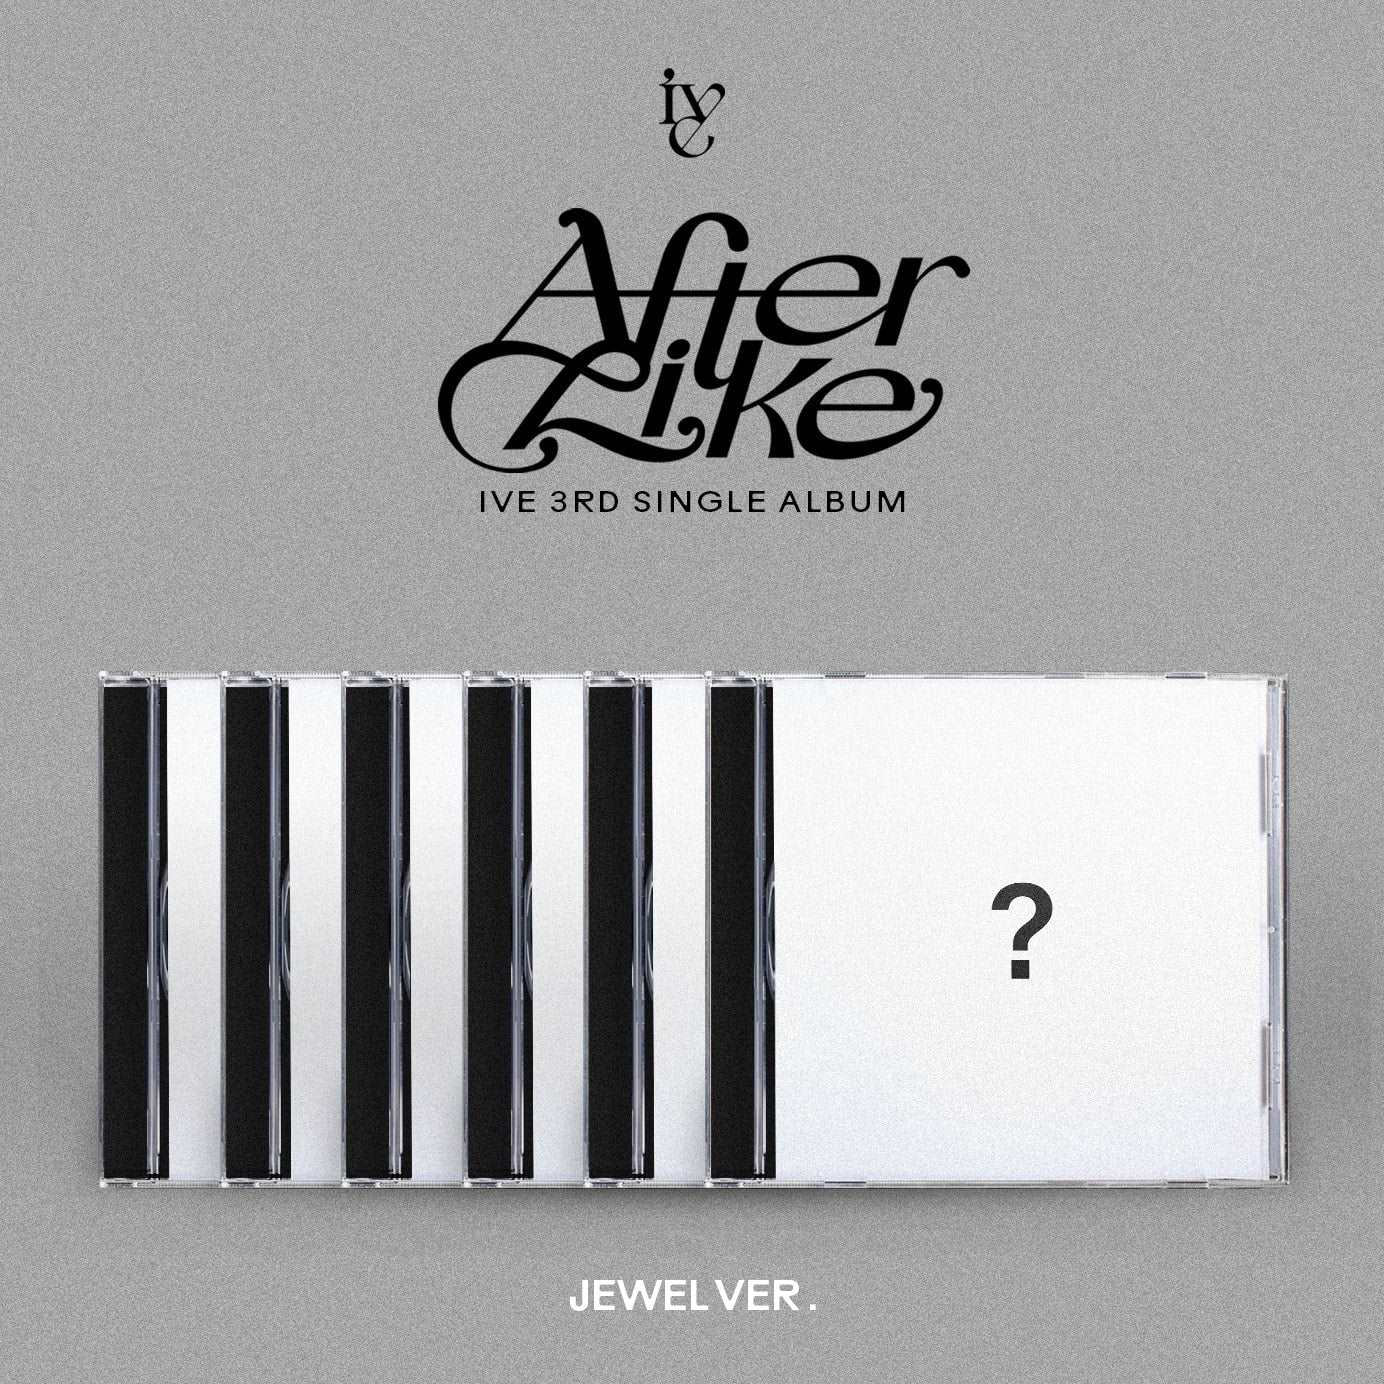 IVE - 3rd Single Album - After Like (Jewel Case) (Limited Edition)